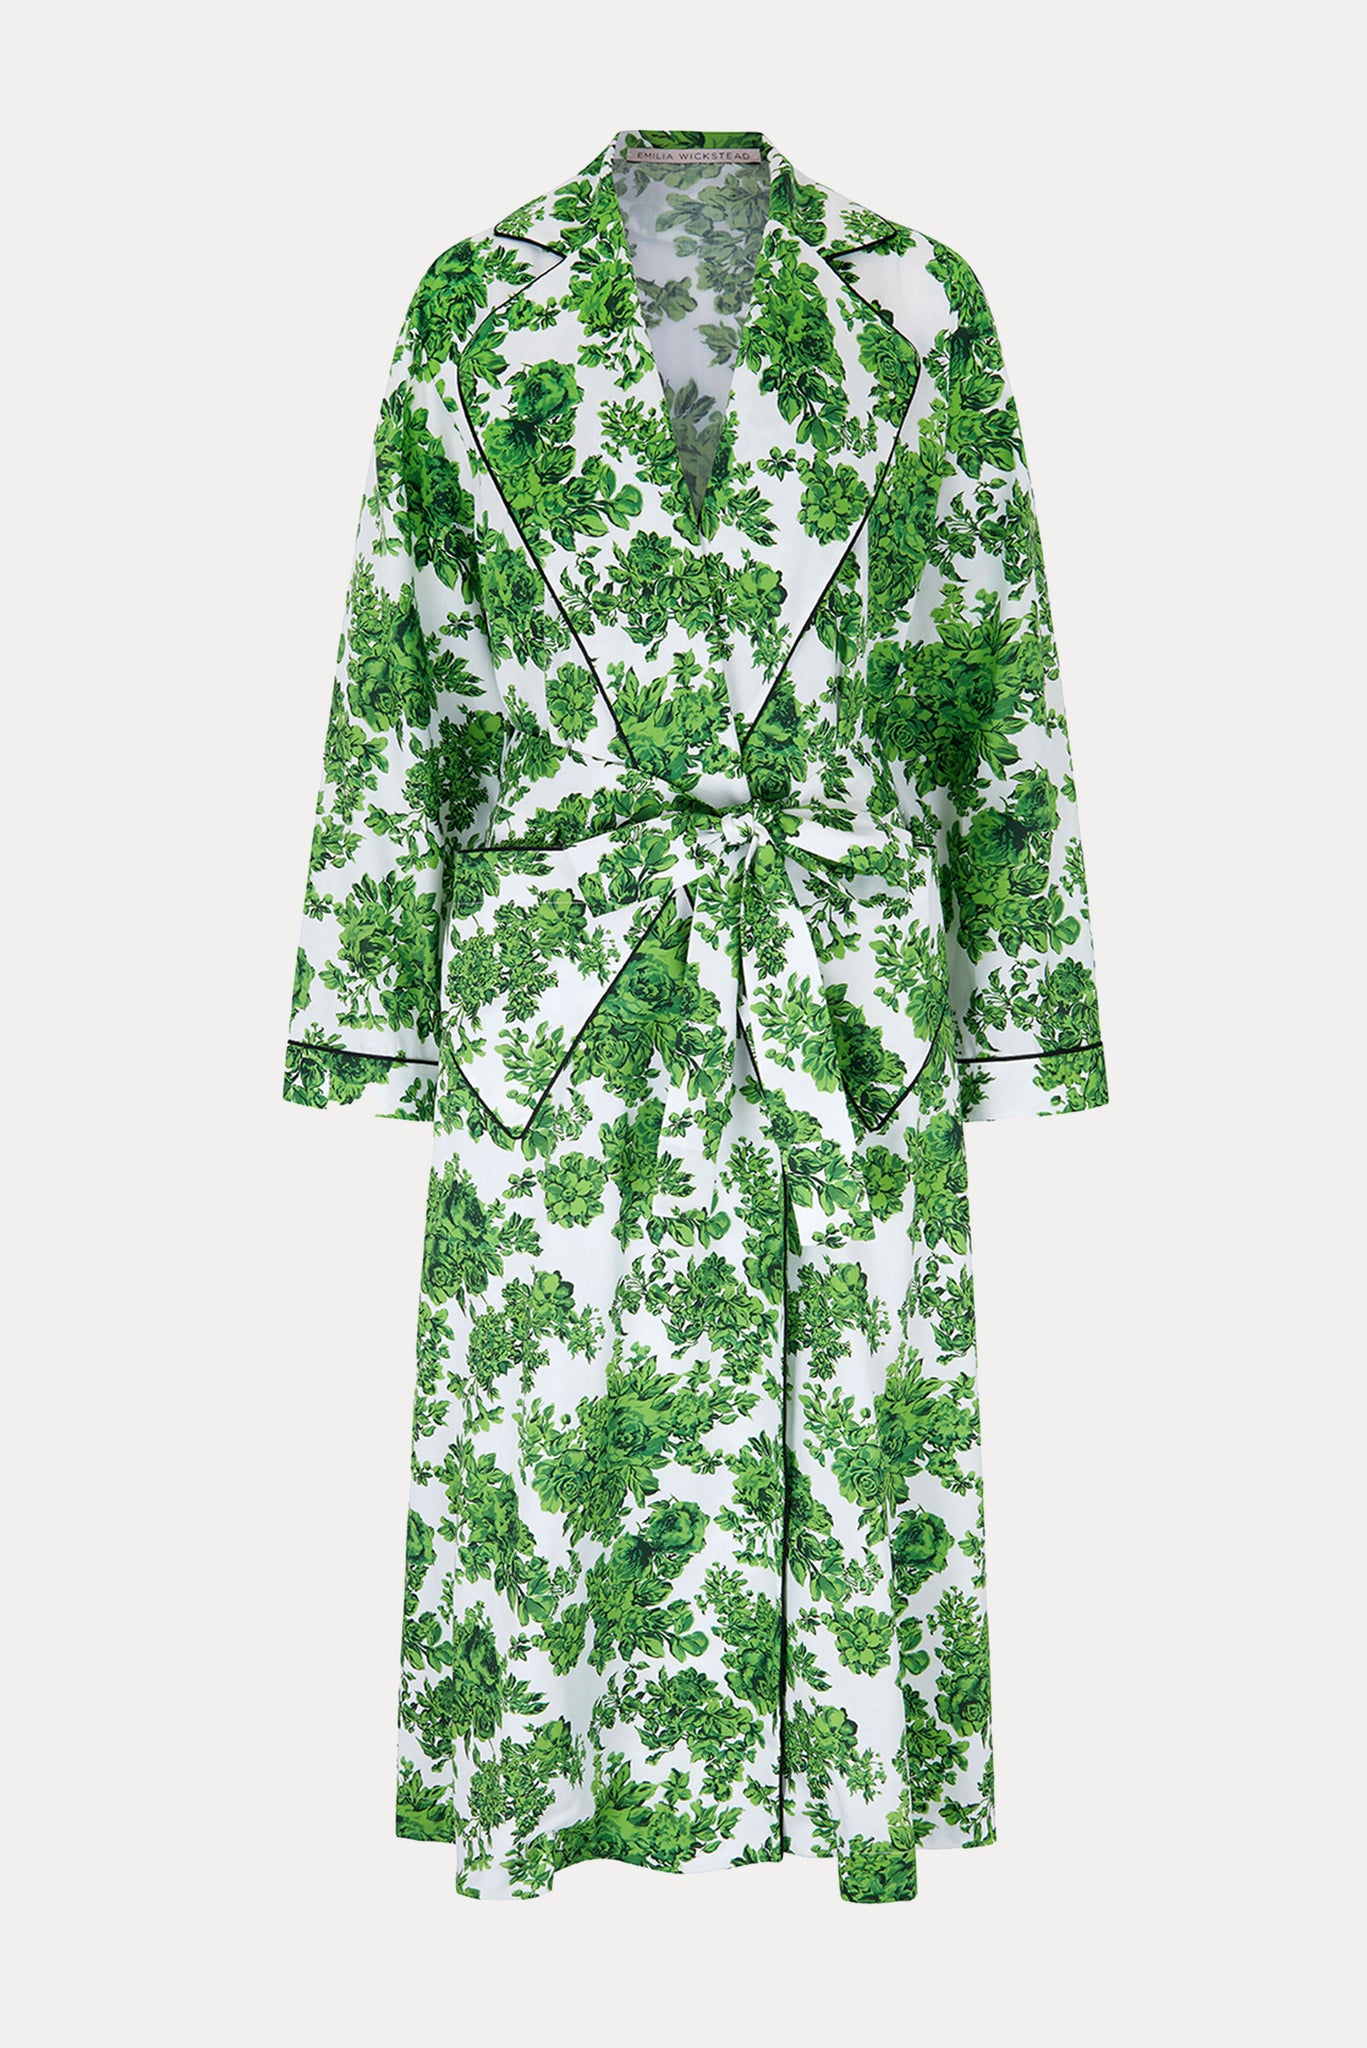 Amana Dressing Gown | Green Printed Roses| Emilia Wickstead